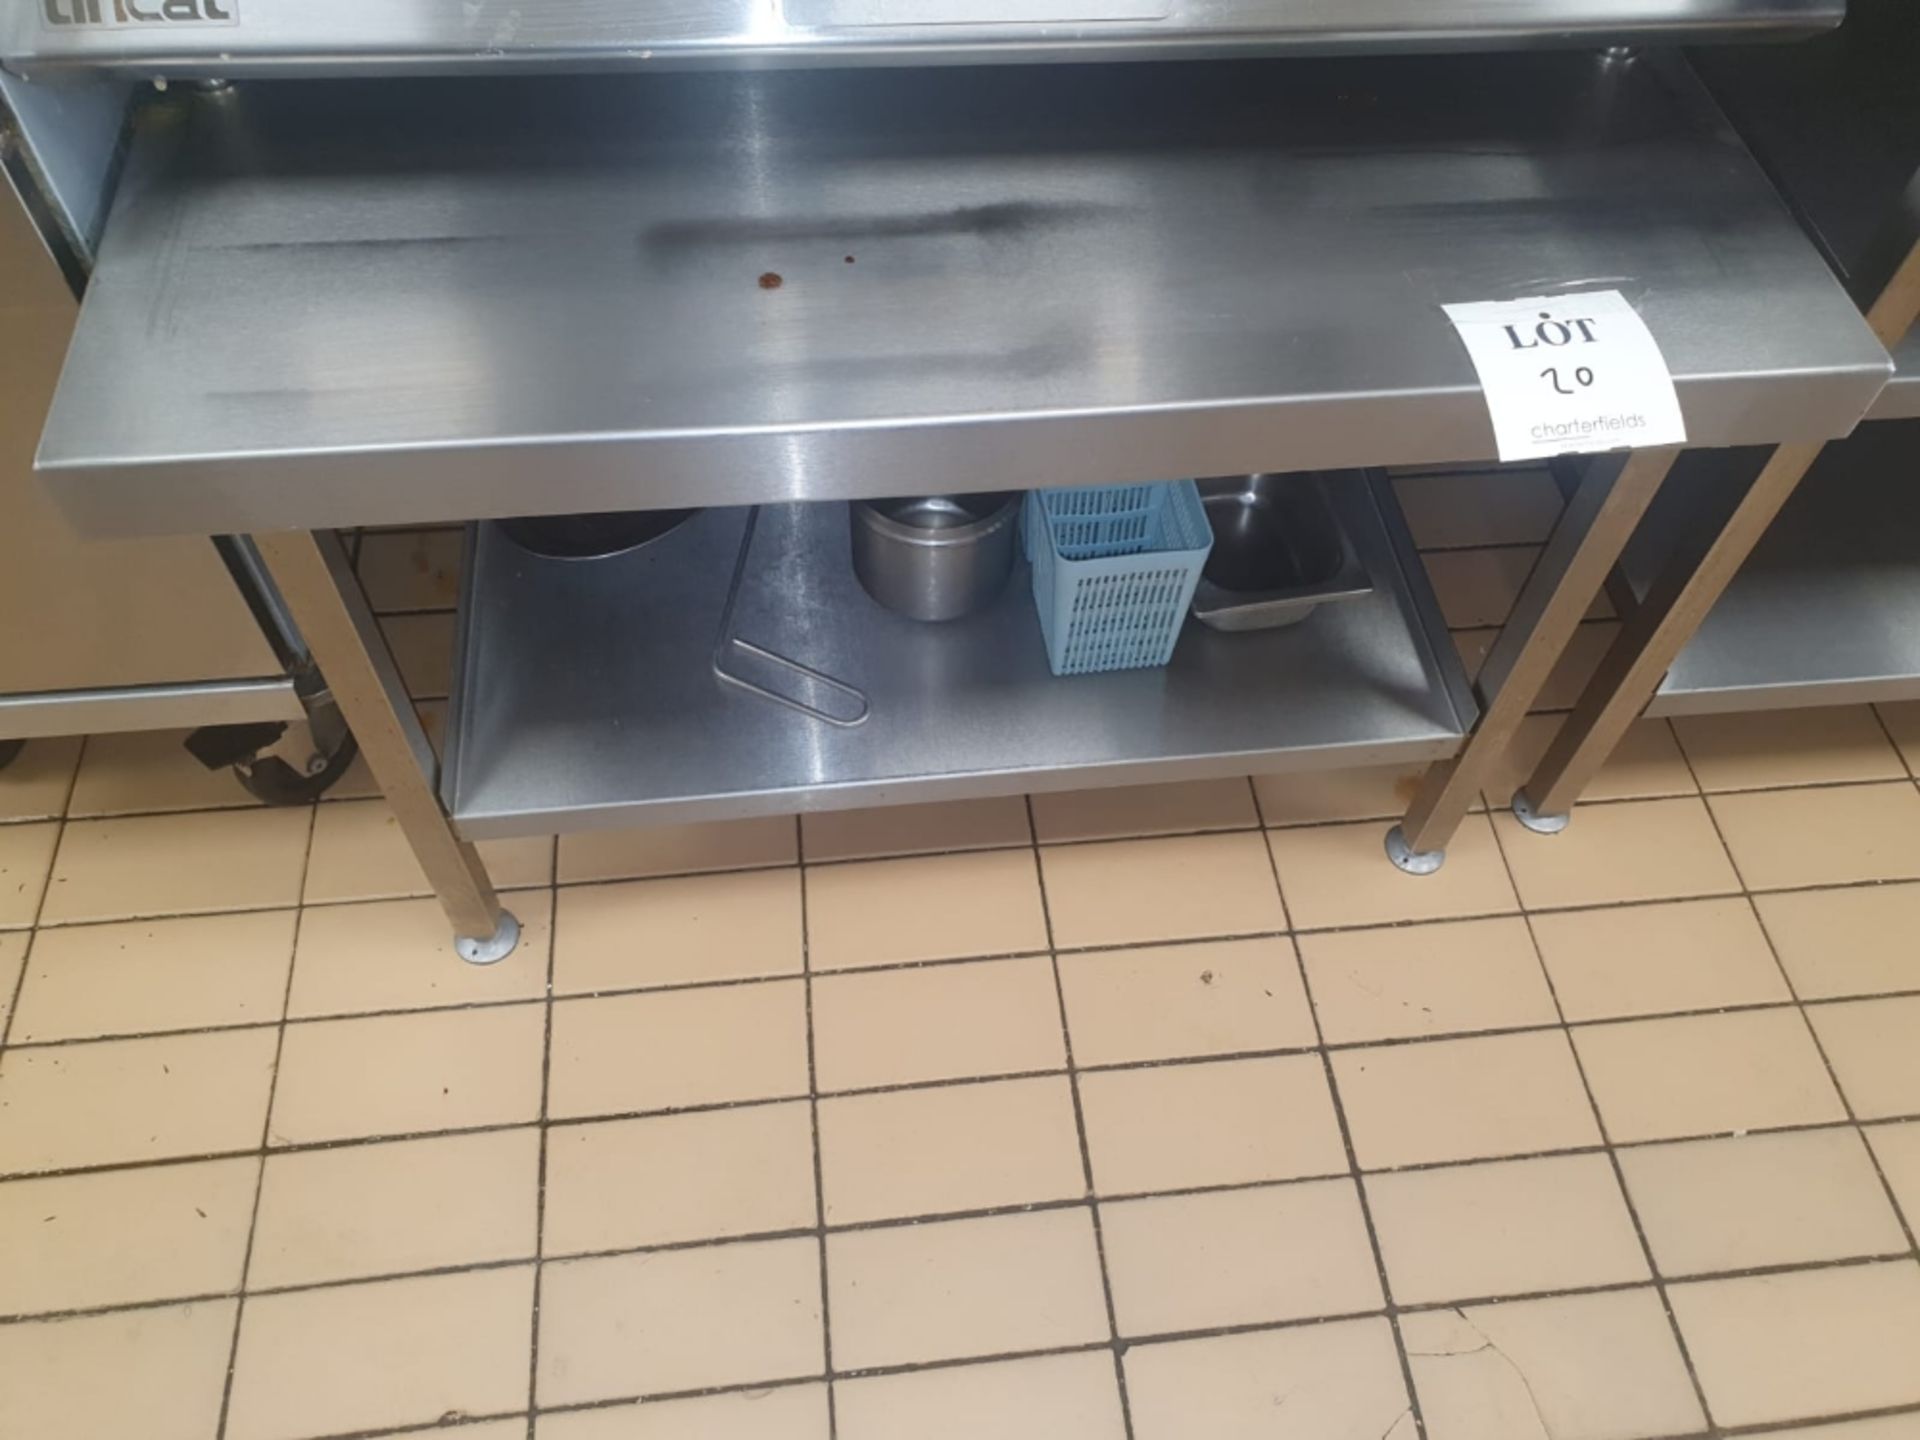 Stainless steel stand/shelf unit